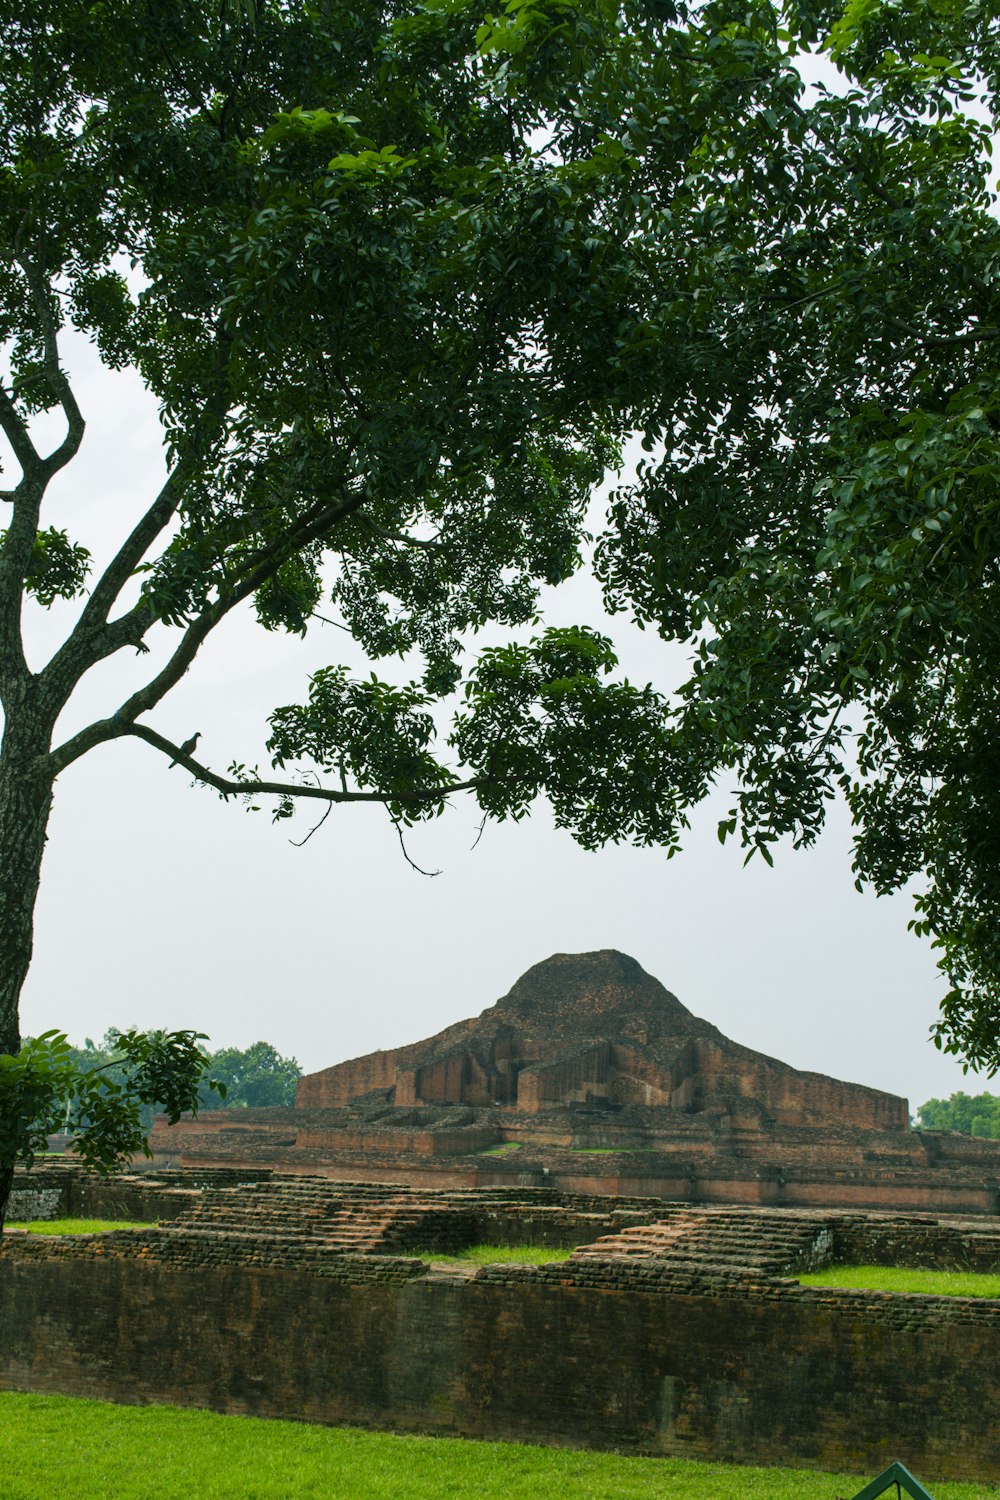 a tree in front of a stone wall and a large pyramid